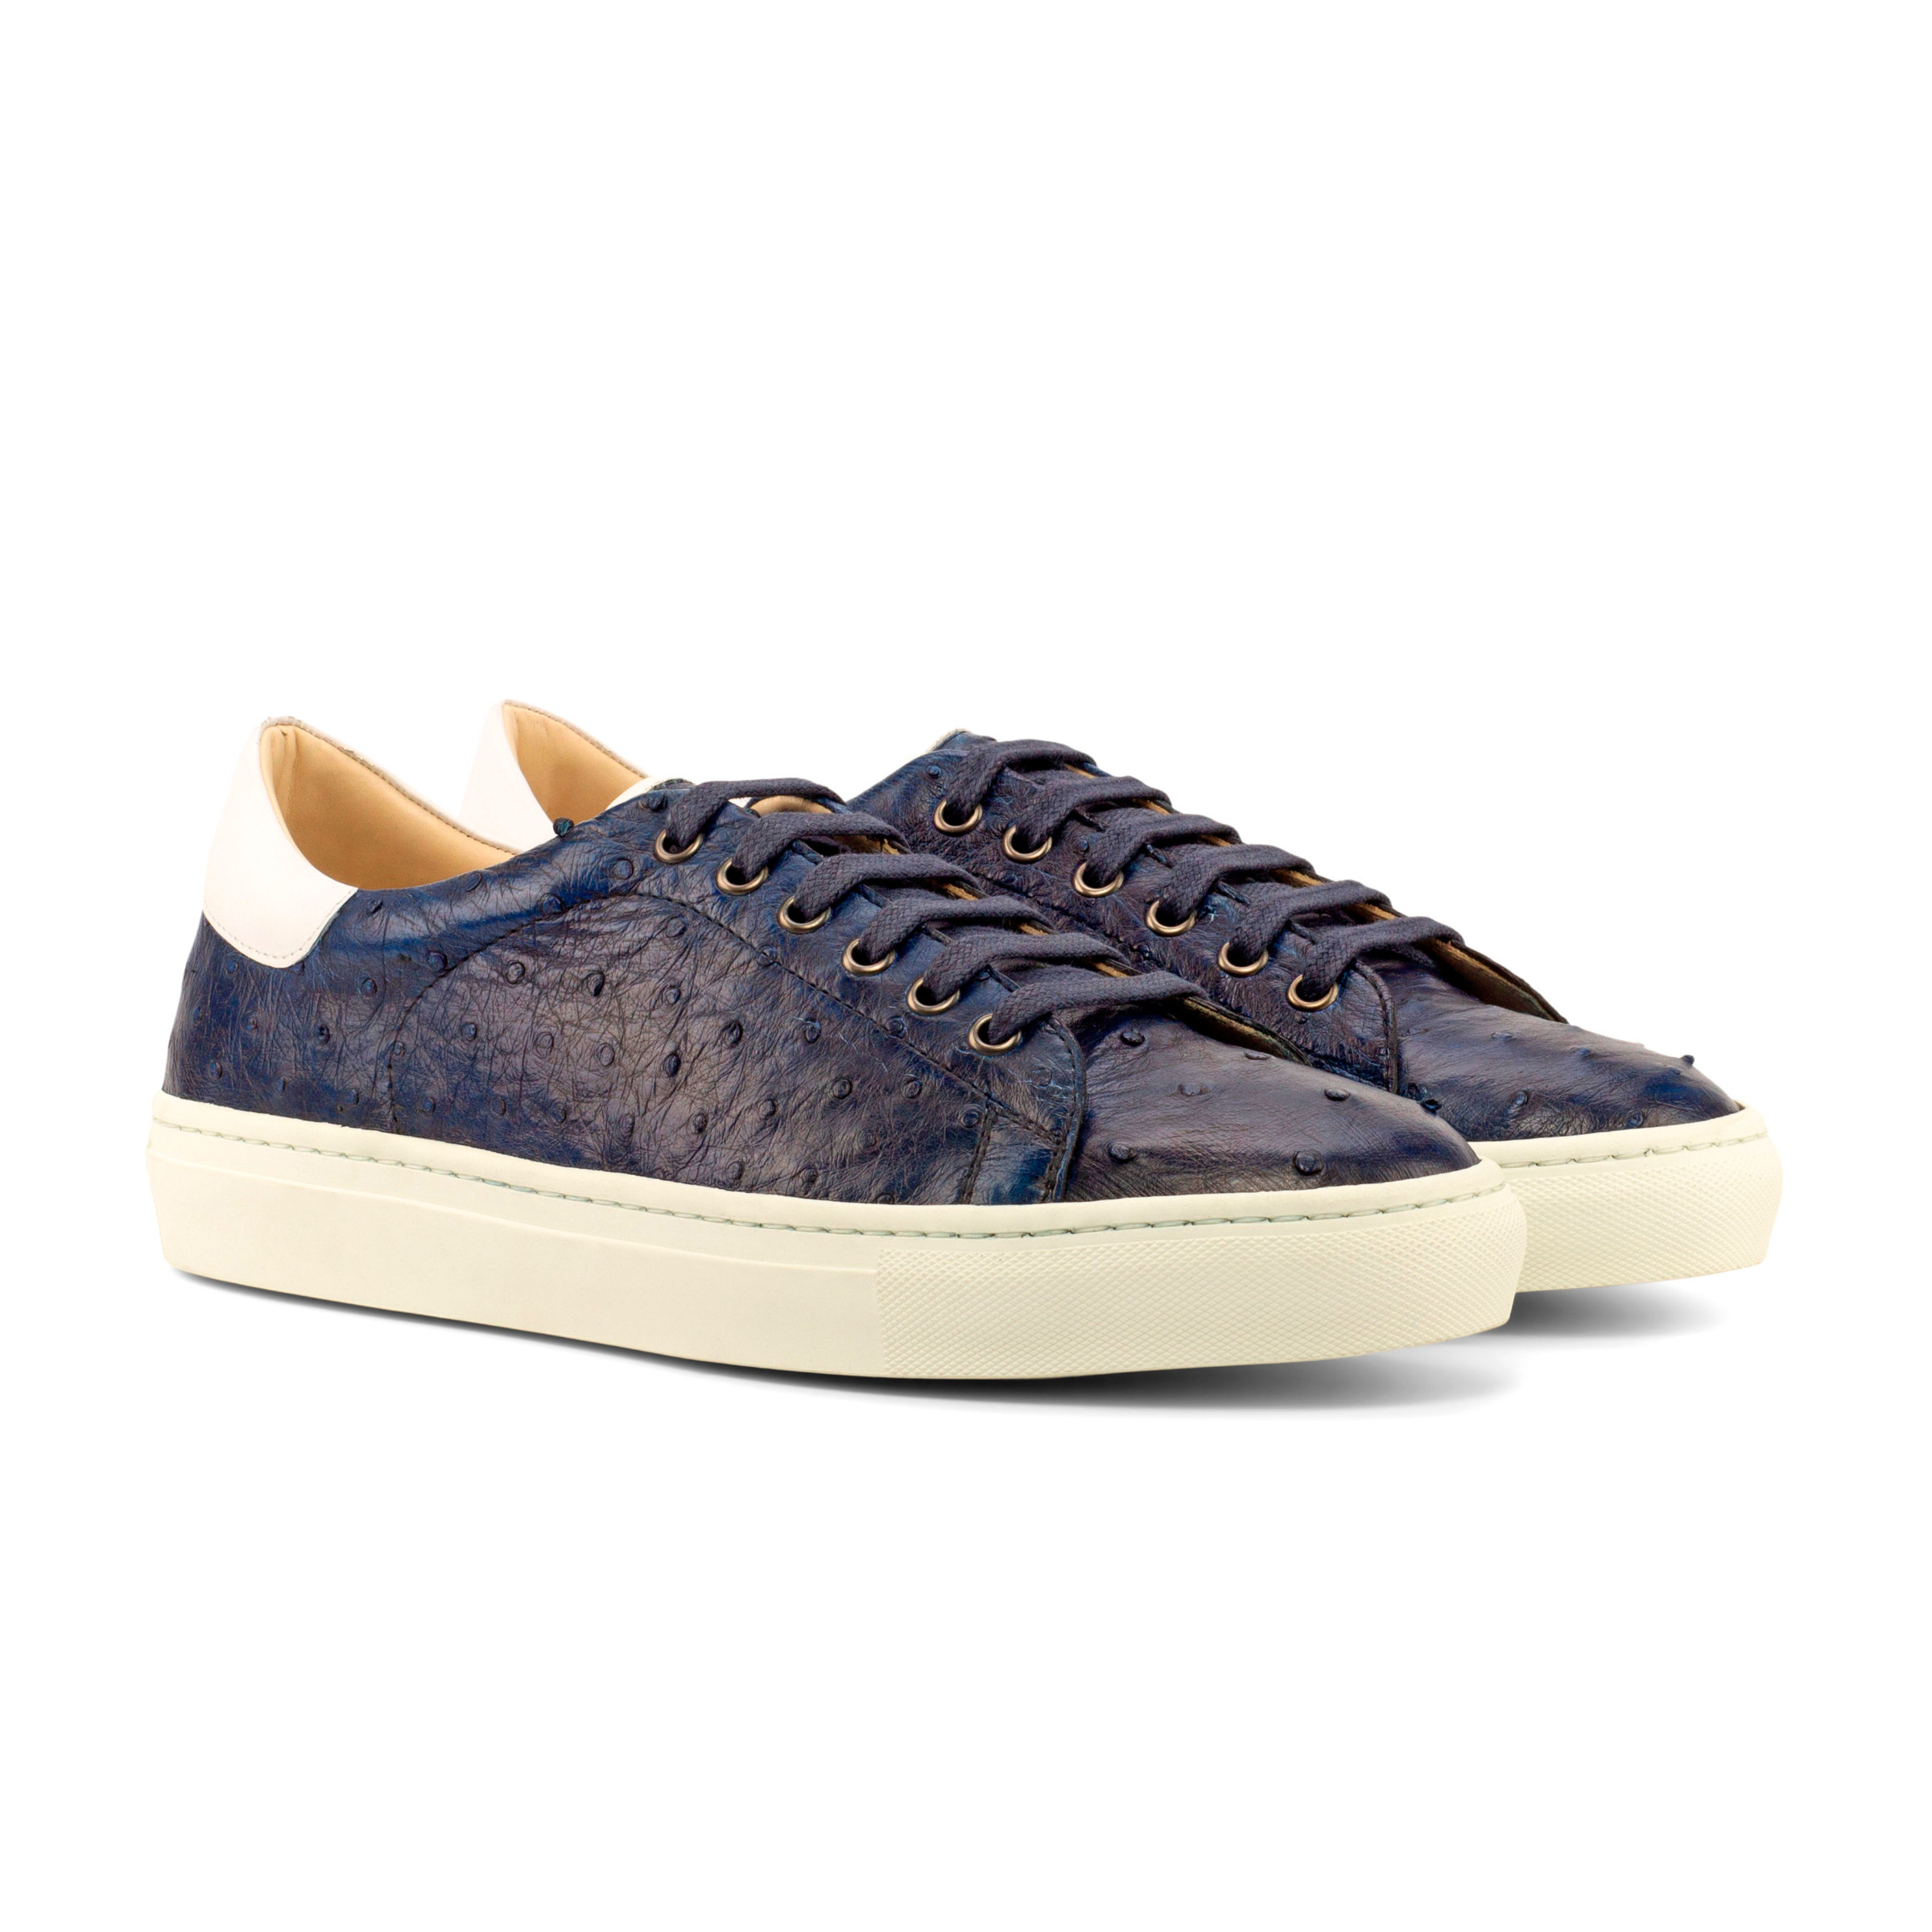 The Plimsoll: Ostrich. White box calf and navy exotic ostrich lace up trainer style shoes with white soles on a white background